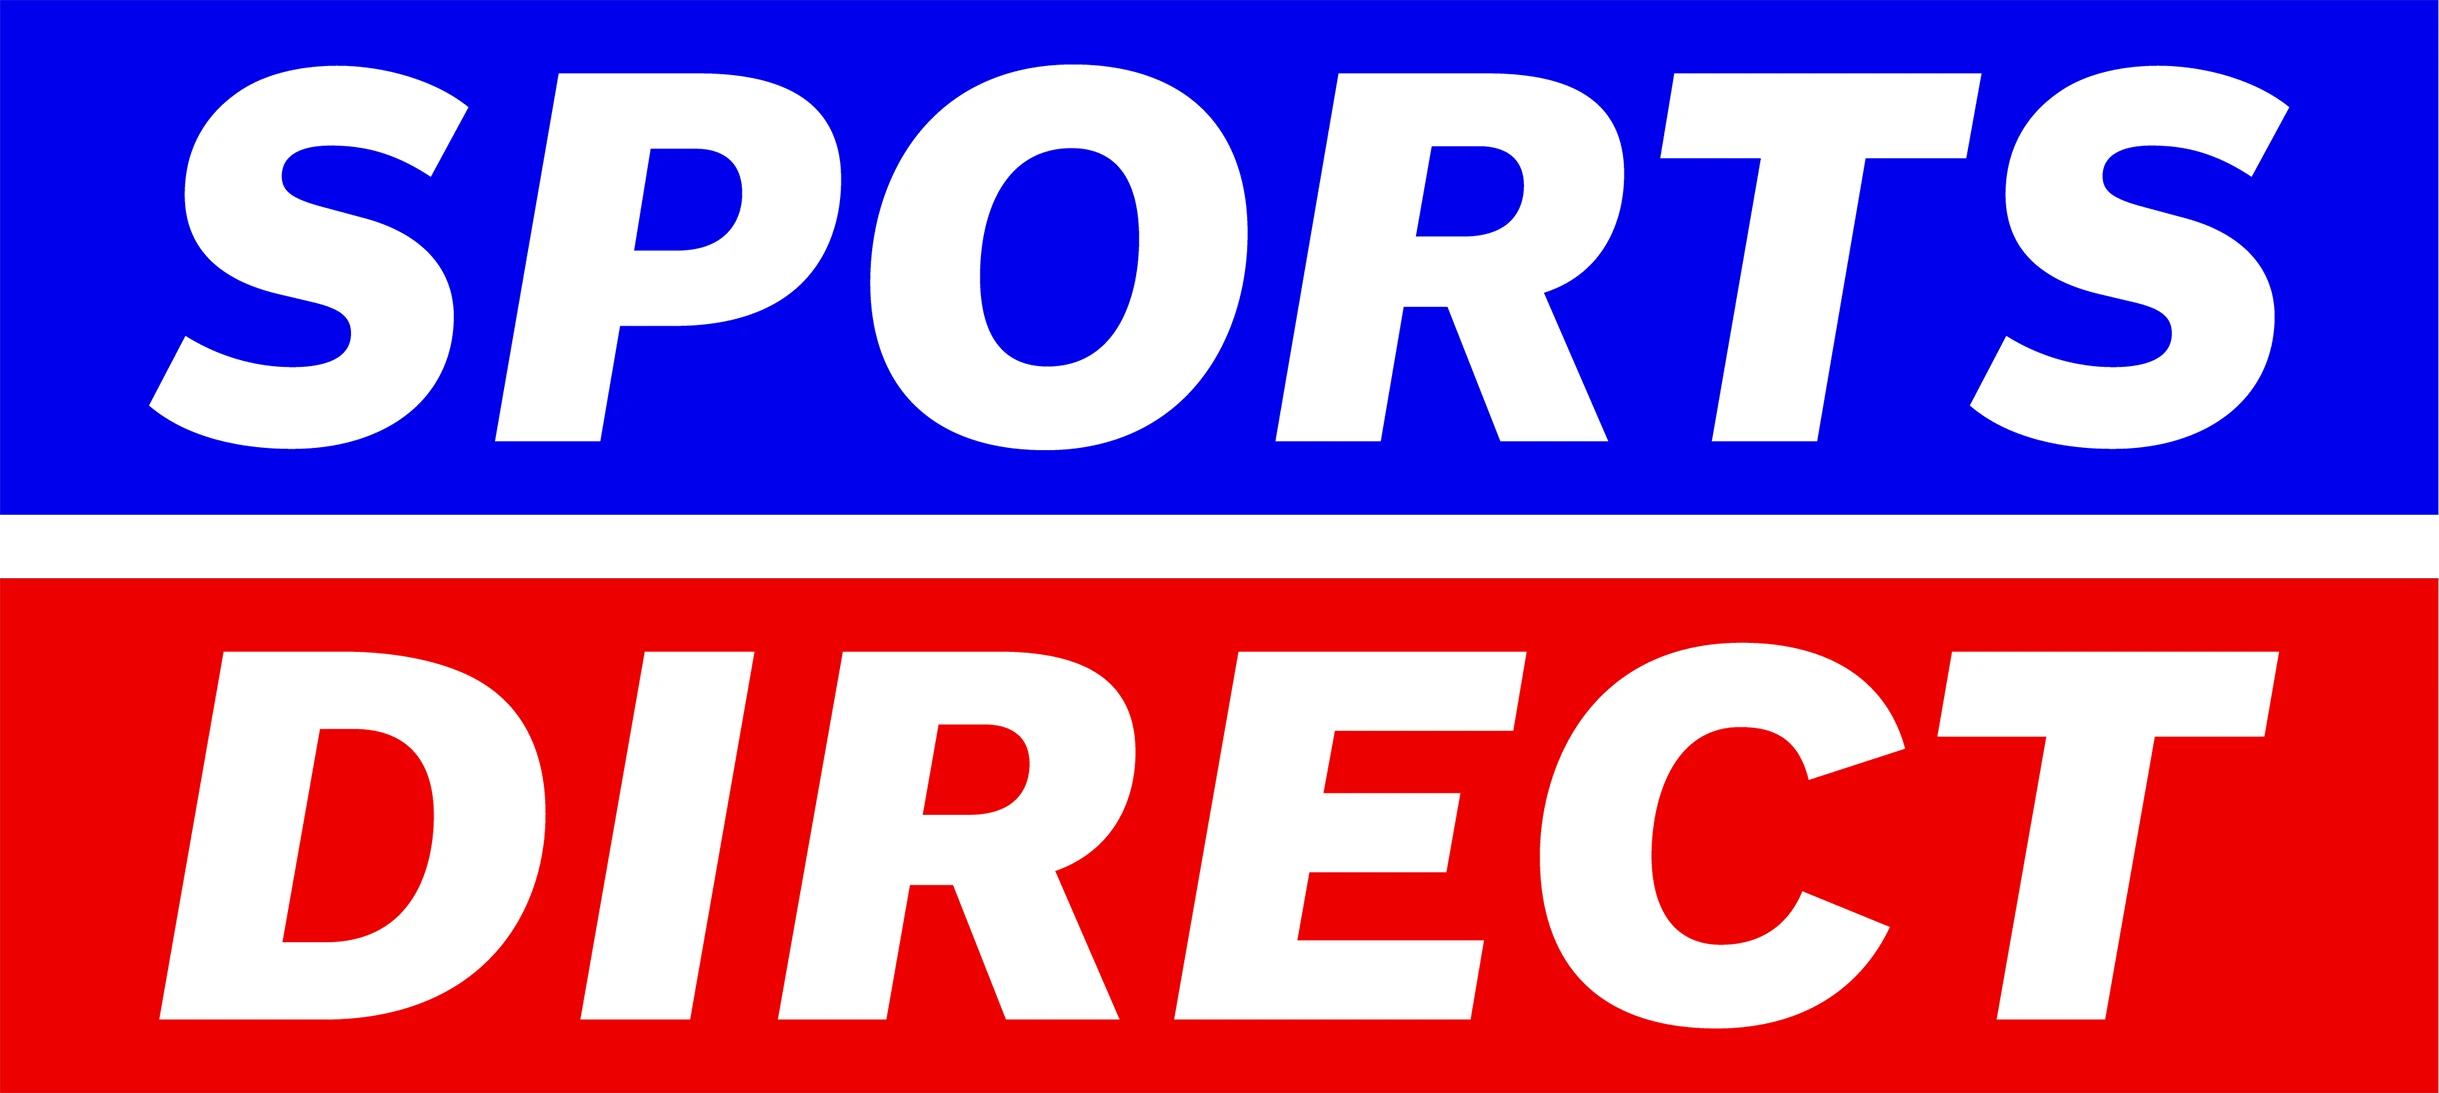 SPORTS DIRECT Codes promotionnels 